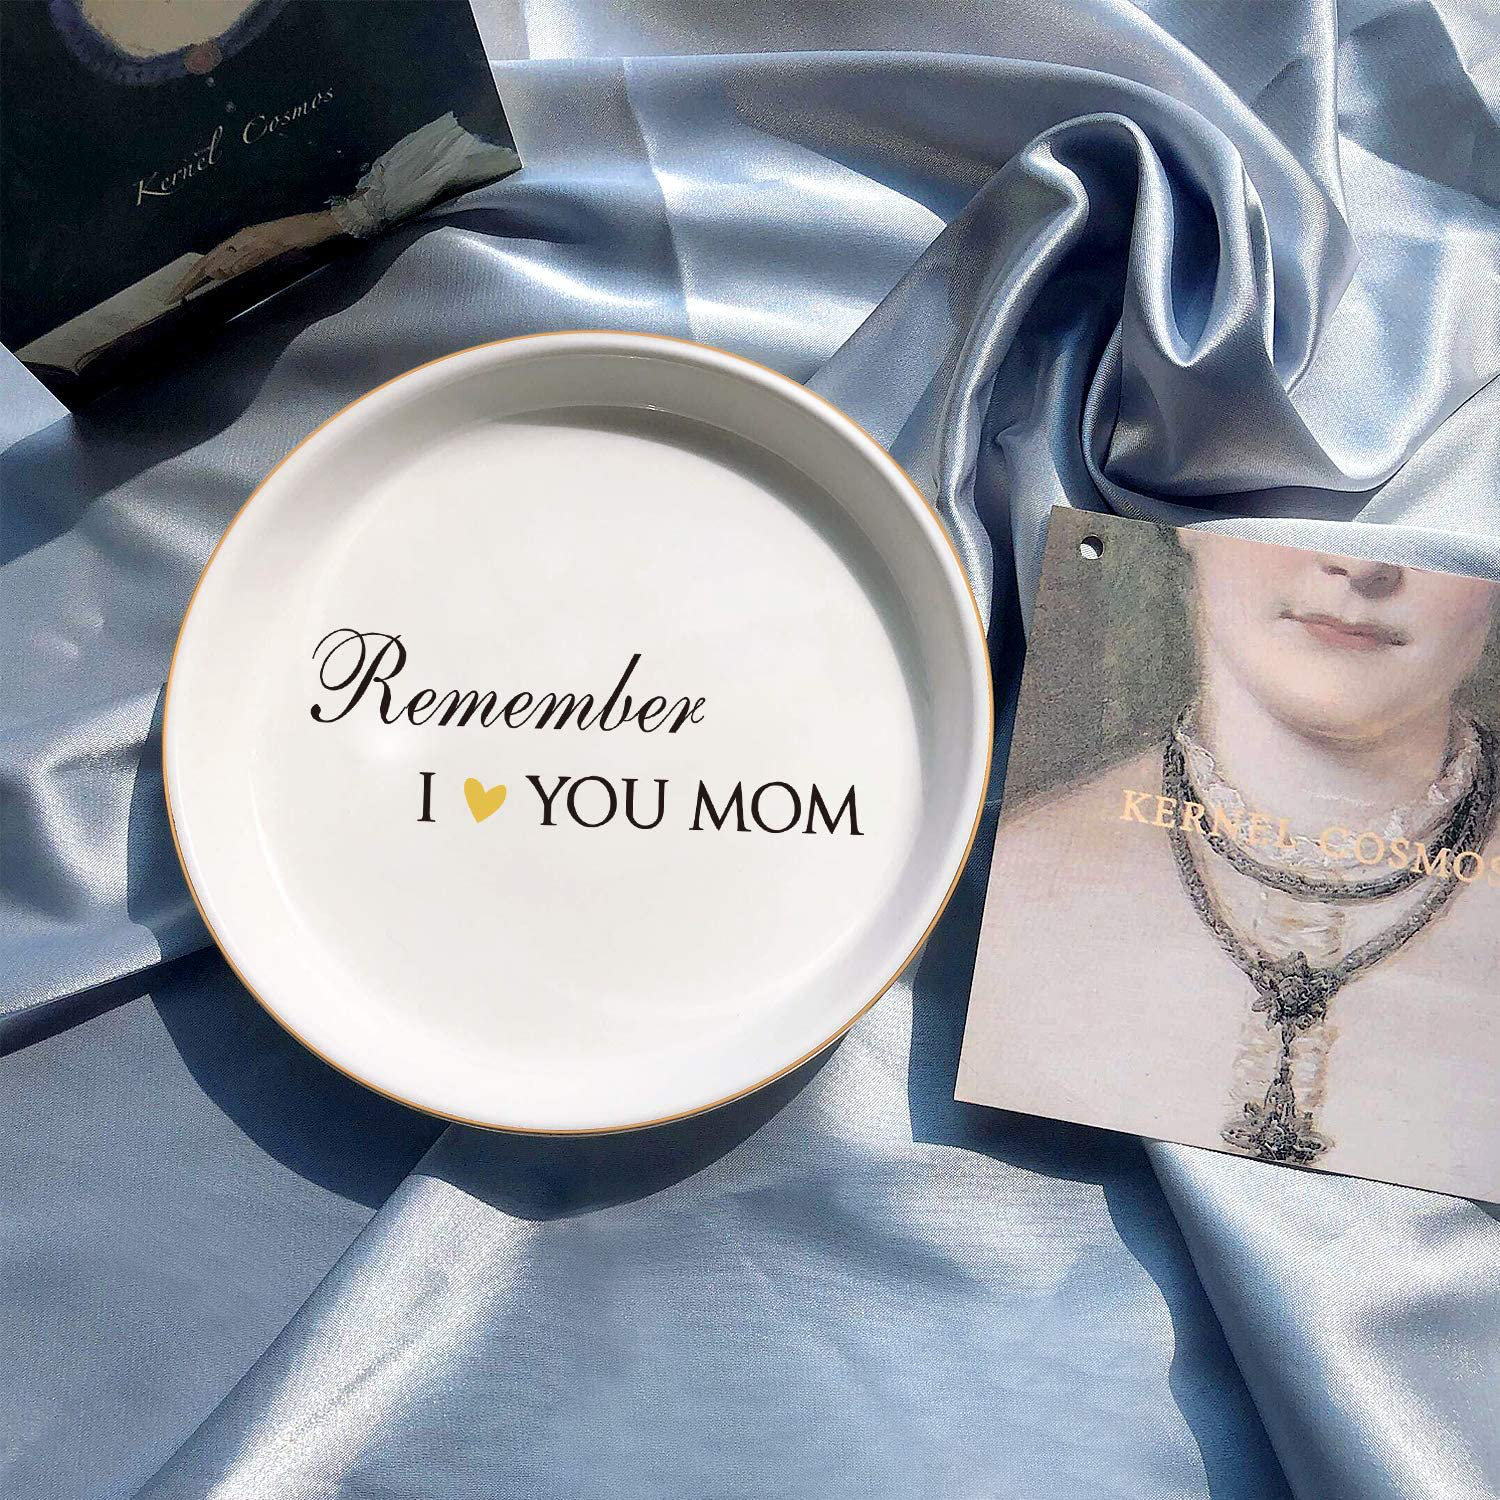 Mom Gifts for Christmas Jewelry Trinket Tray Ceramic Ring Dish Holder Birthday Gifts for Mom Remember That I Love You Mom Mom Gifts Happy Mothers Day from Daughter Son Mom Valentine Gift